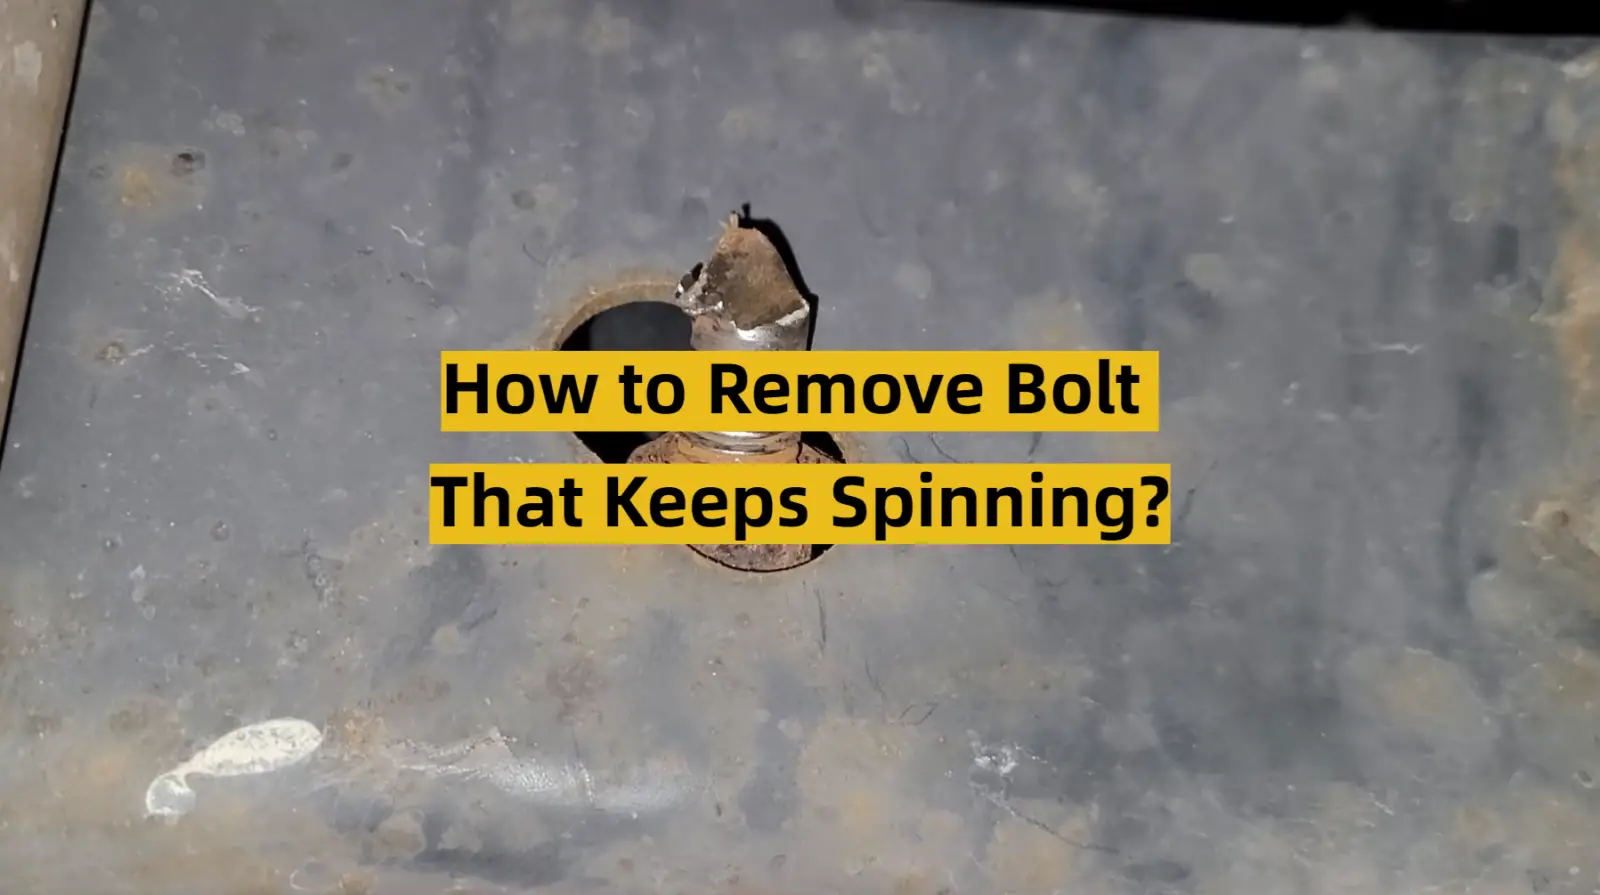 How to Remove Bolt That Keeps Spinning?